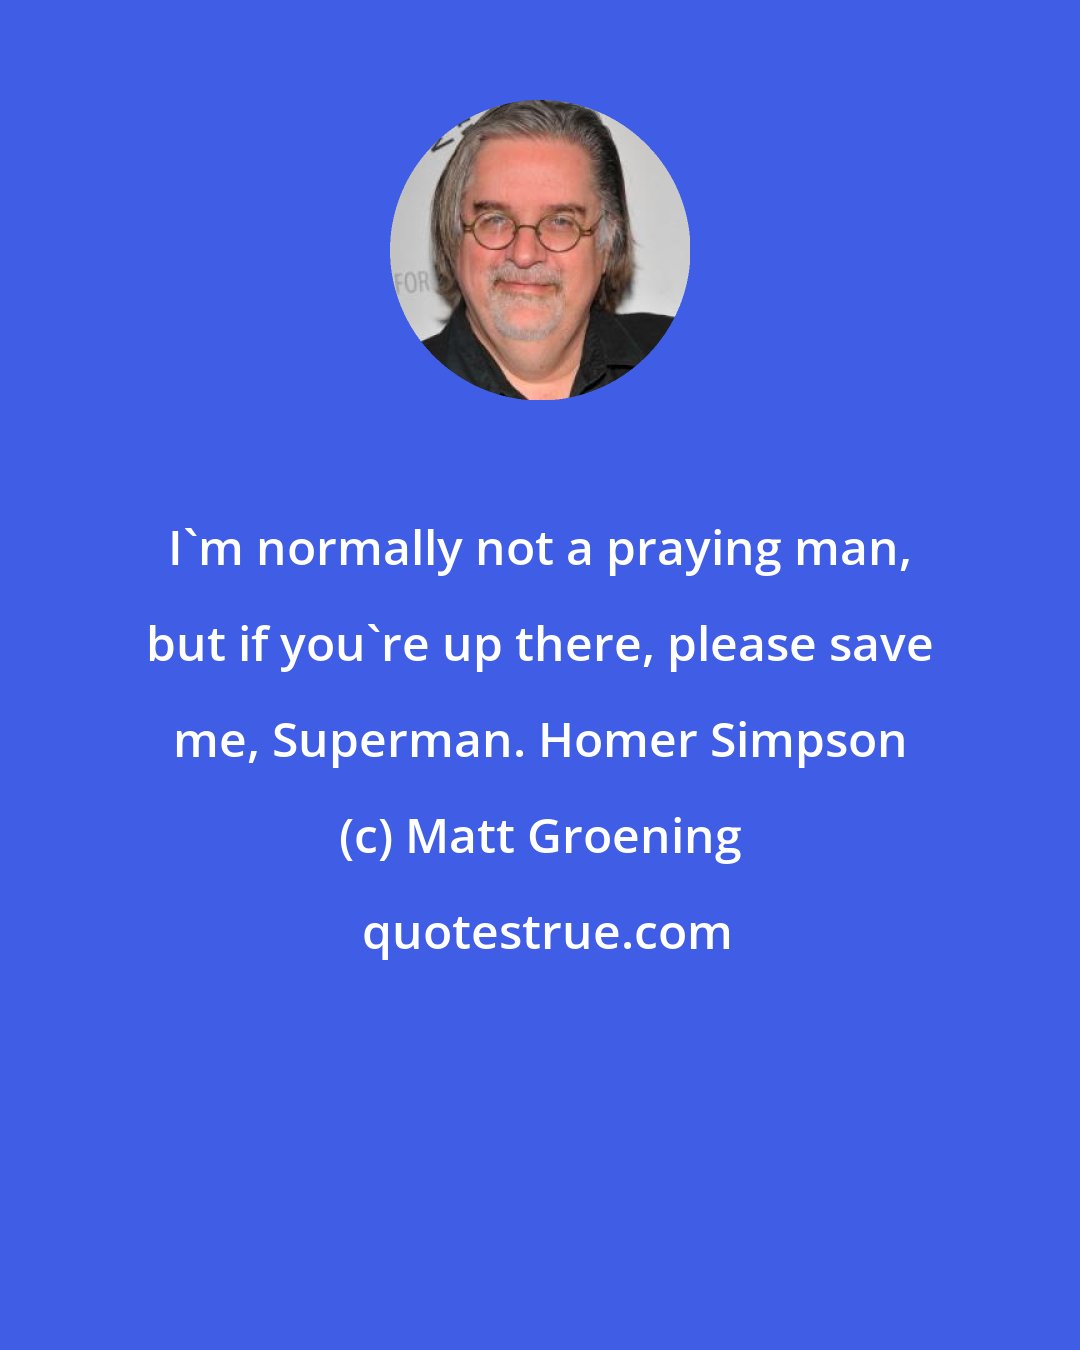 Matt Groening: I'm normally not a praying man, but if you're up there, please save me, Superman. Homer Simpson